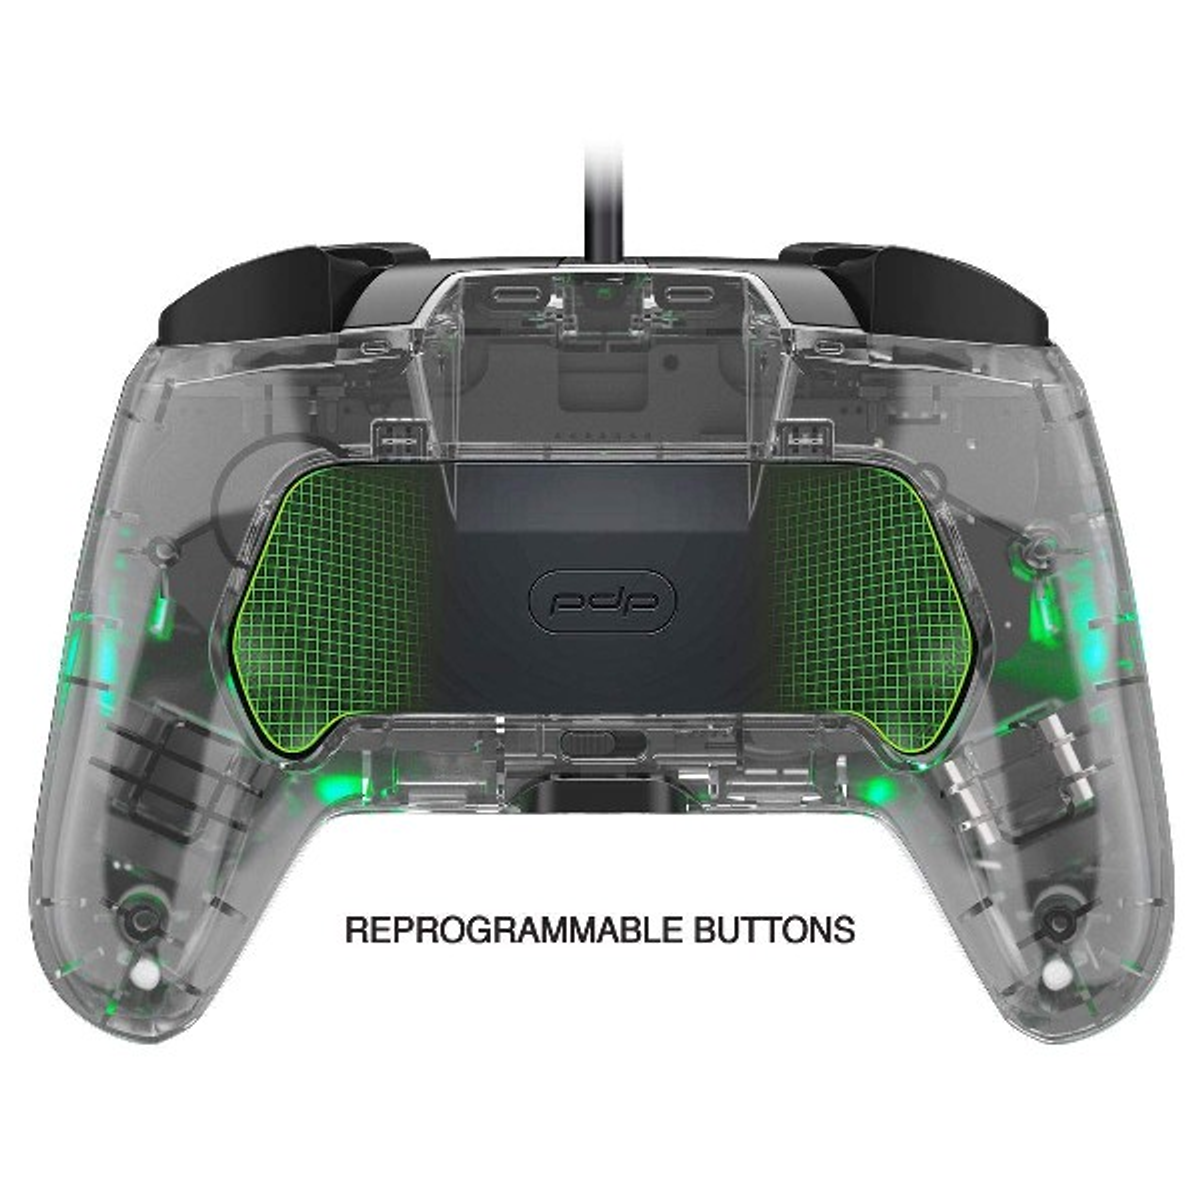 500-132-EU CONTROLLER Controller AUDIO Durchsichtig DELUXE PDP WIRED AFTERGLOW